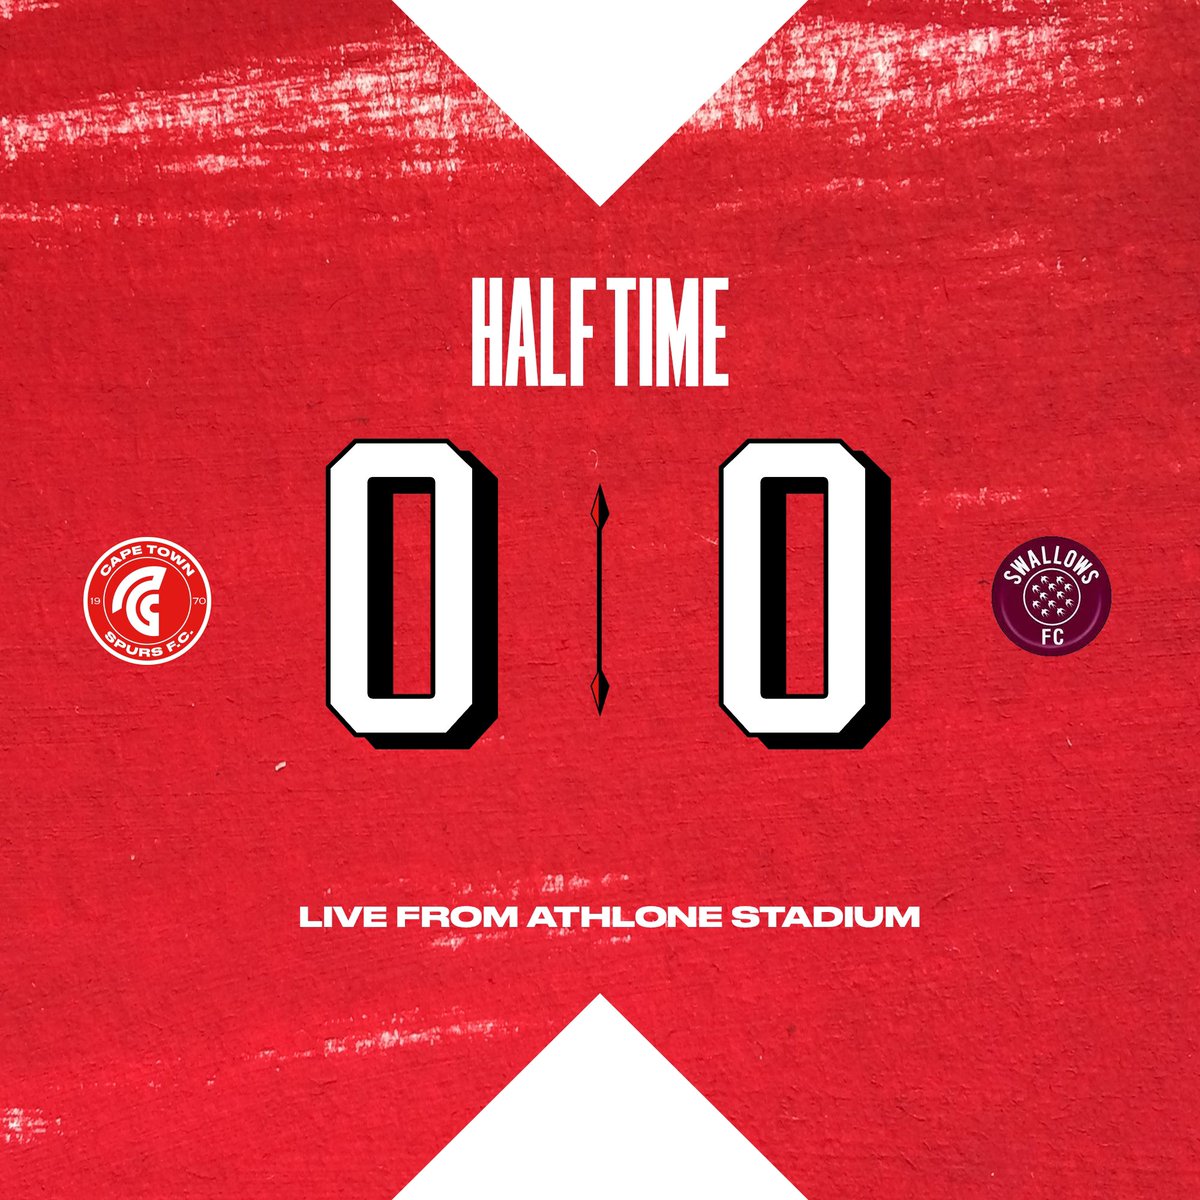 Half-time in the Mother City… #CAPETOWNSPURS #URBANWARRIORS #PSL #DSTVPREMIERSHIP #OURYOUTHOURFUTURE #CAPETOWN #SOUTHAFRICA